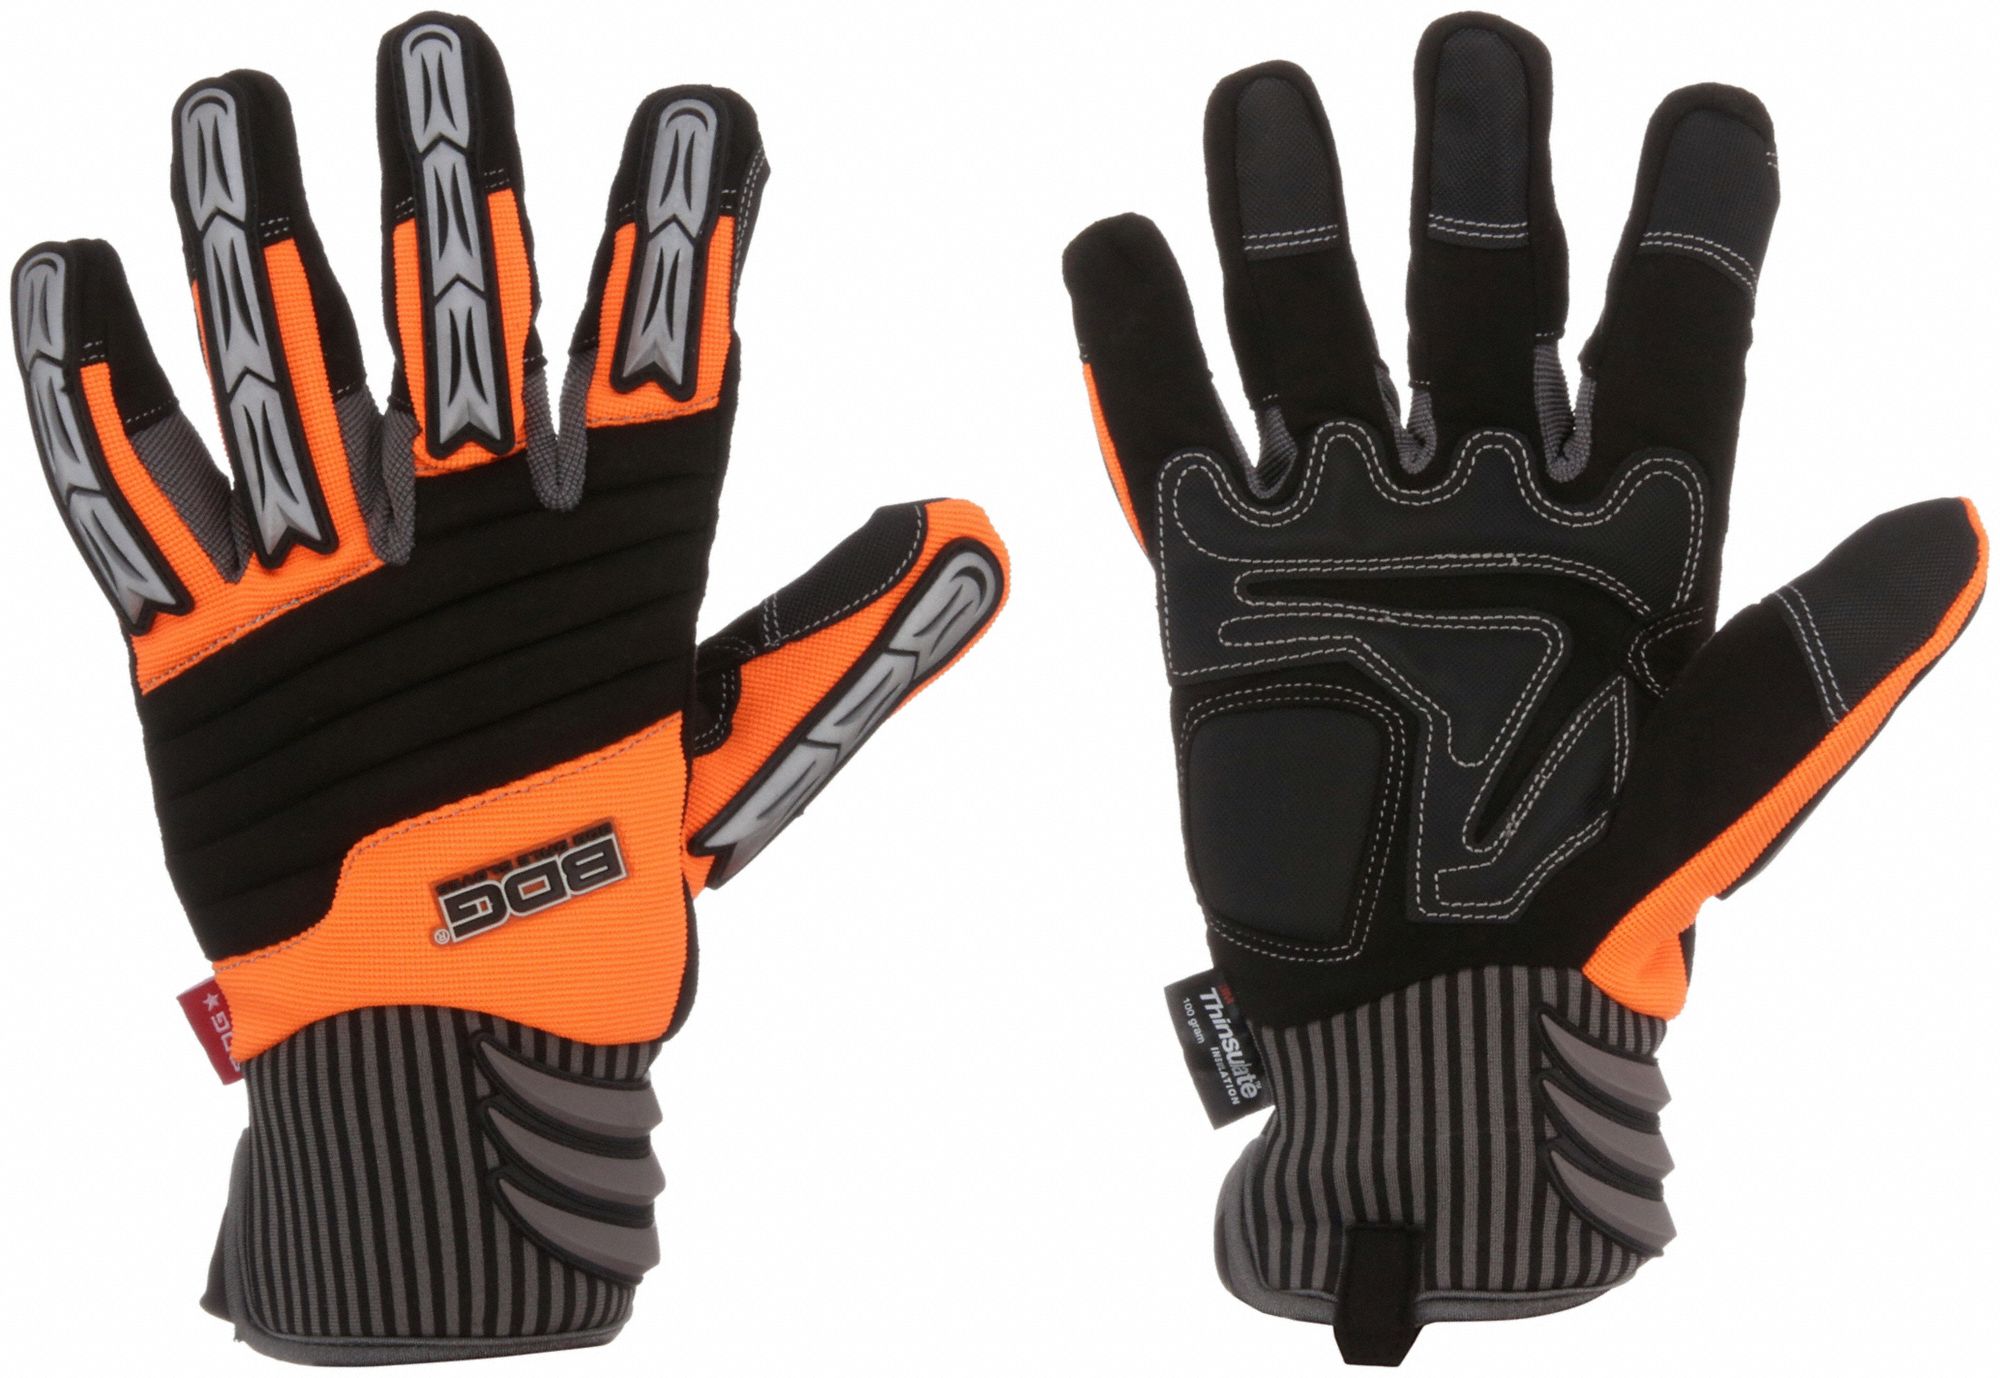 BOB DALE MECHANICS GLOVES, S (7), SYNTHETIC LEATHER, SLIP-ON CUFF, PADDED  PALM - Mechanics- & Riggers-Style General Purpose Gloves - ALG20-9-10690S